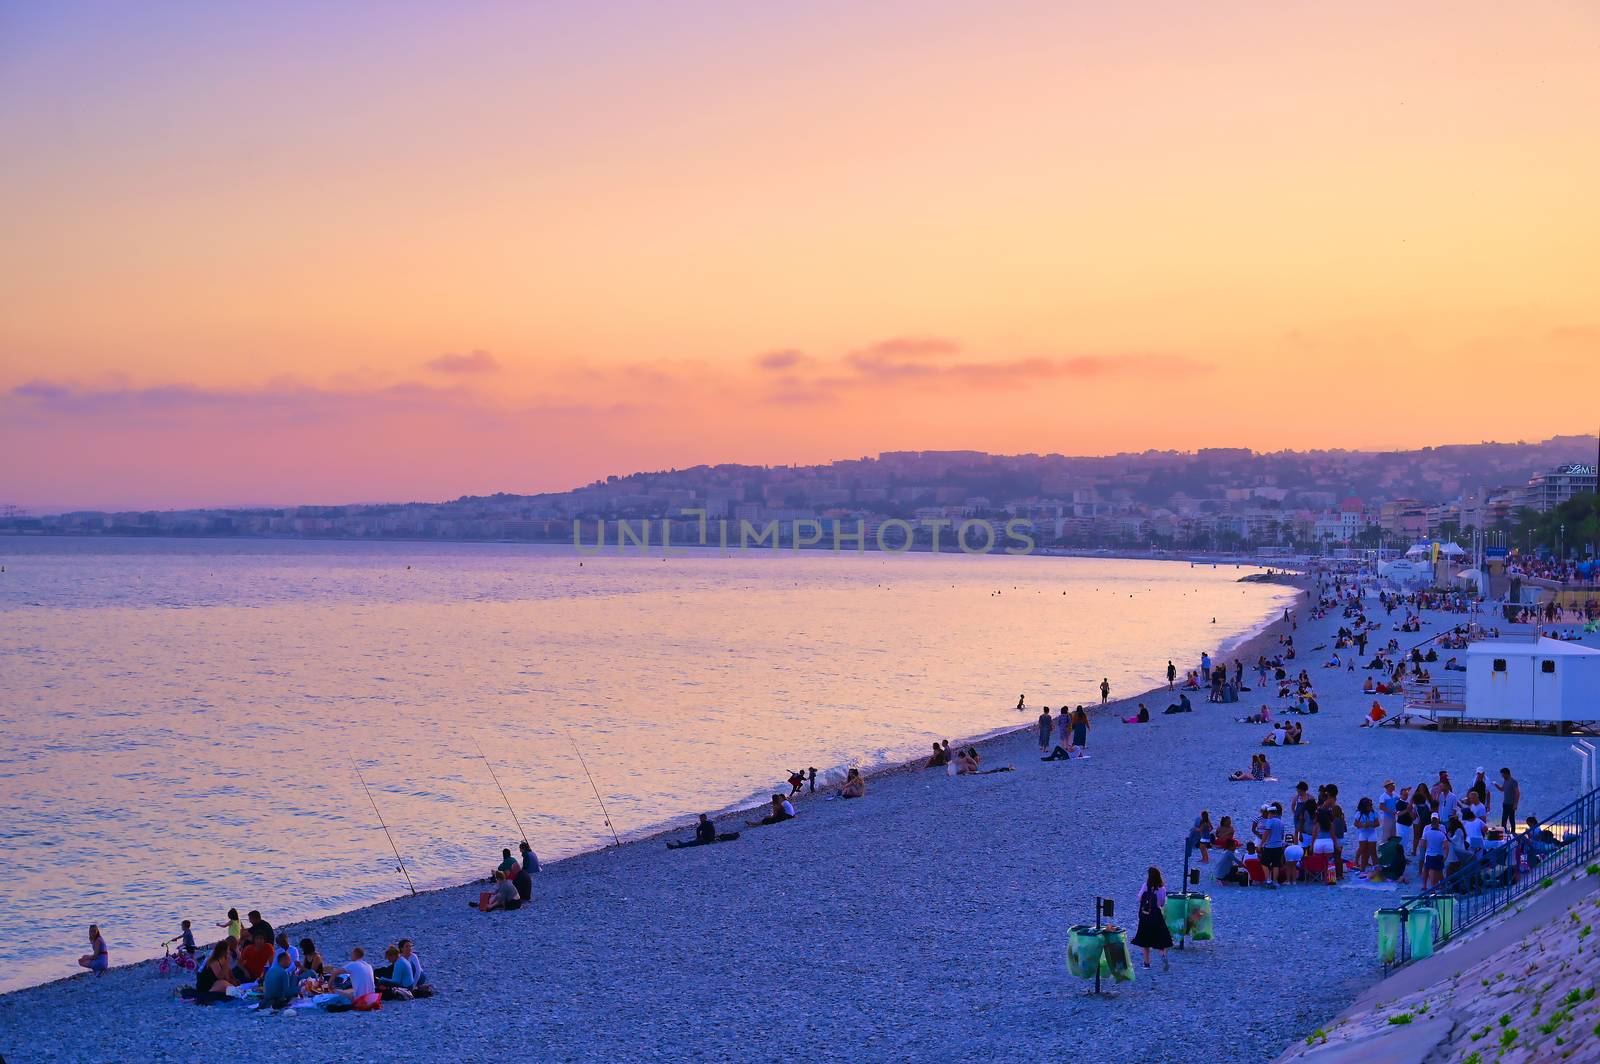 Nice, France - June 8, 2019 - The Promenade des Anglais on the Mediterranean Sea at Nice, France along the French Riviera at sunset.